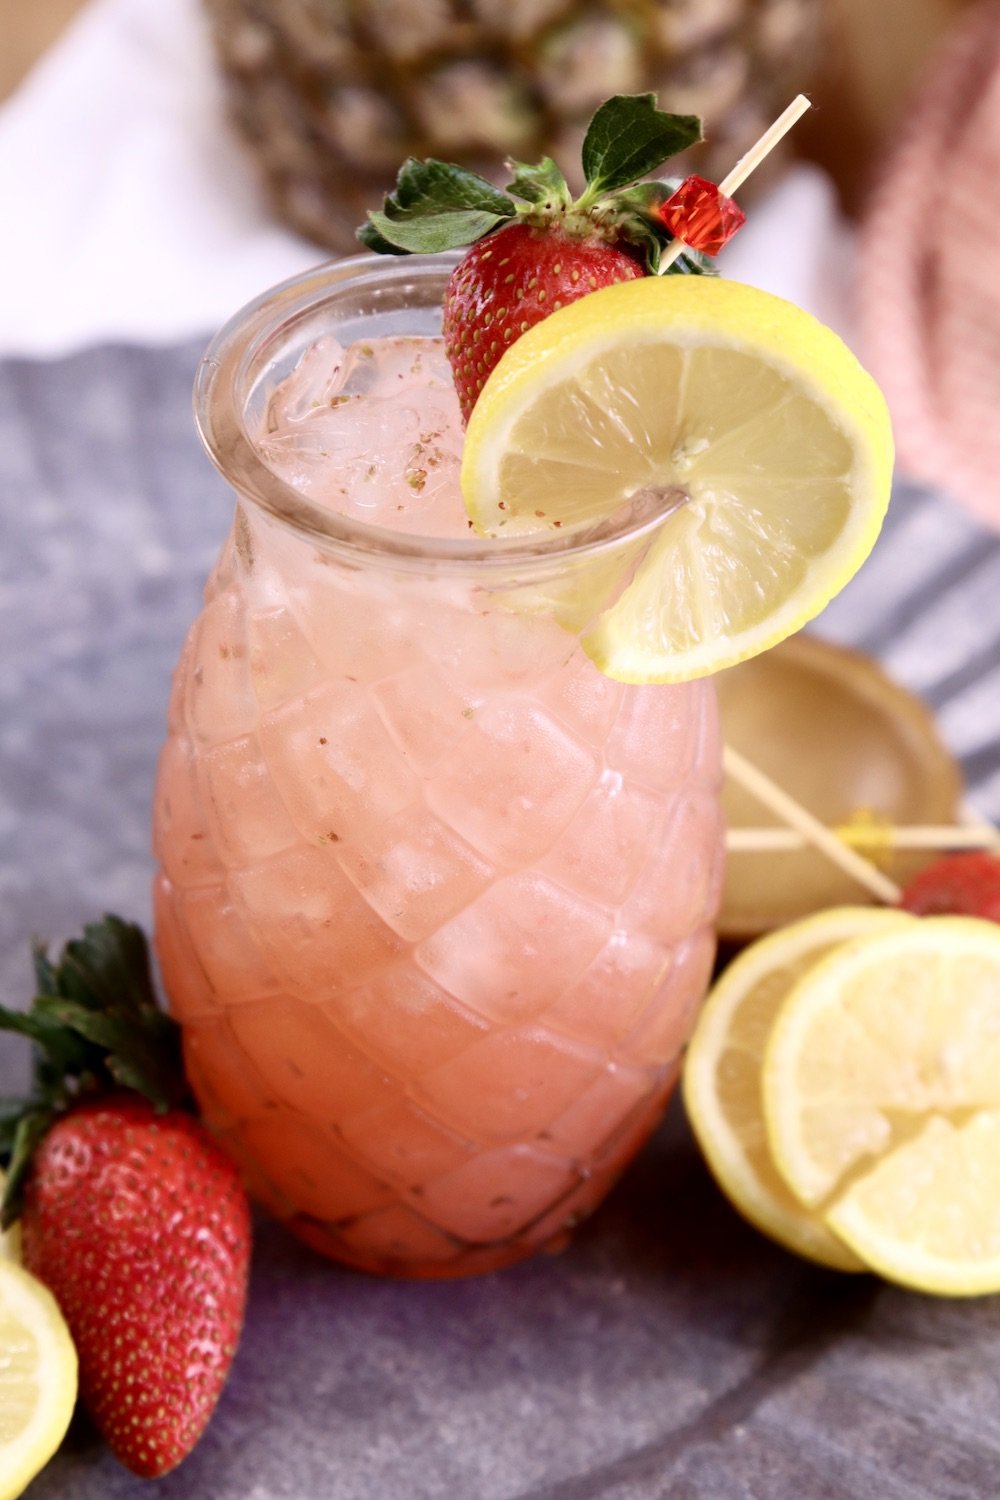 Pineapple shaped glass with pink cocktail, lemon slice and fresh strawberry garnish